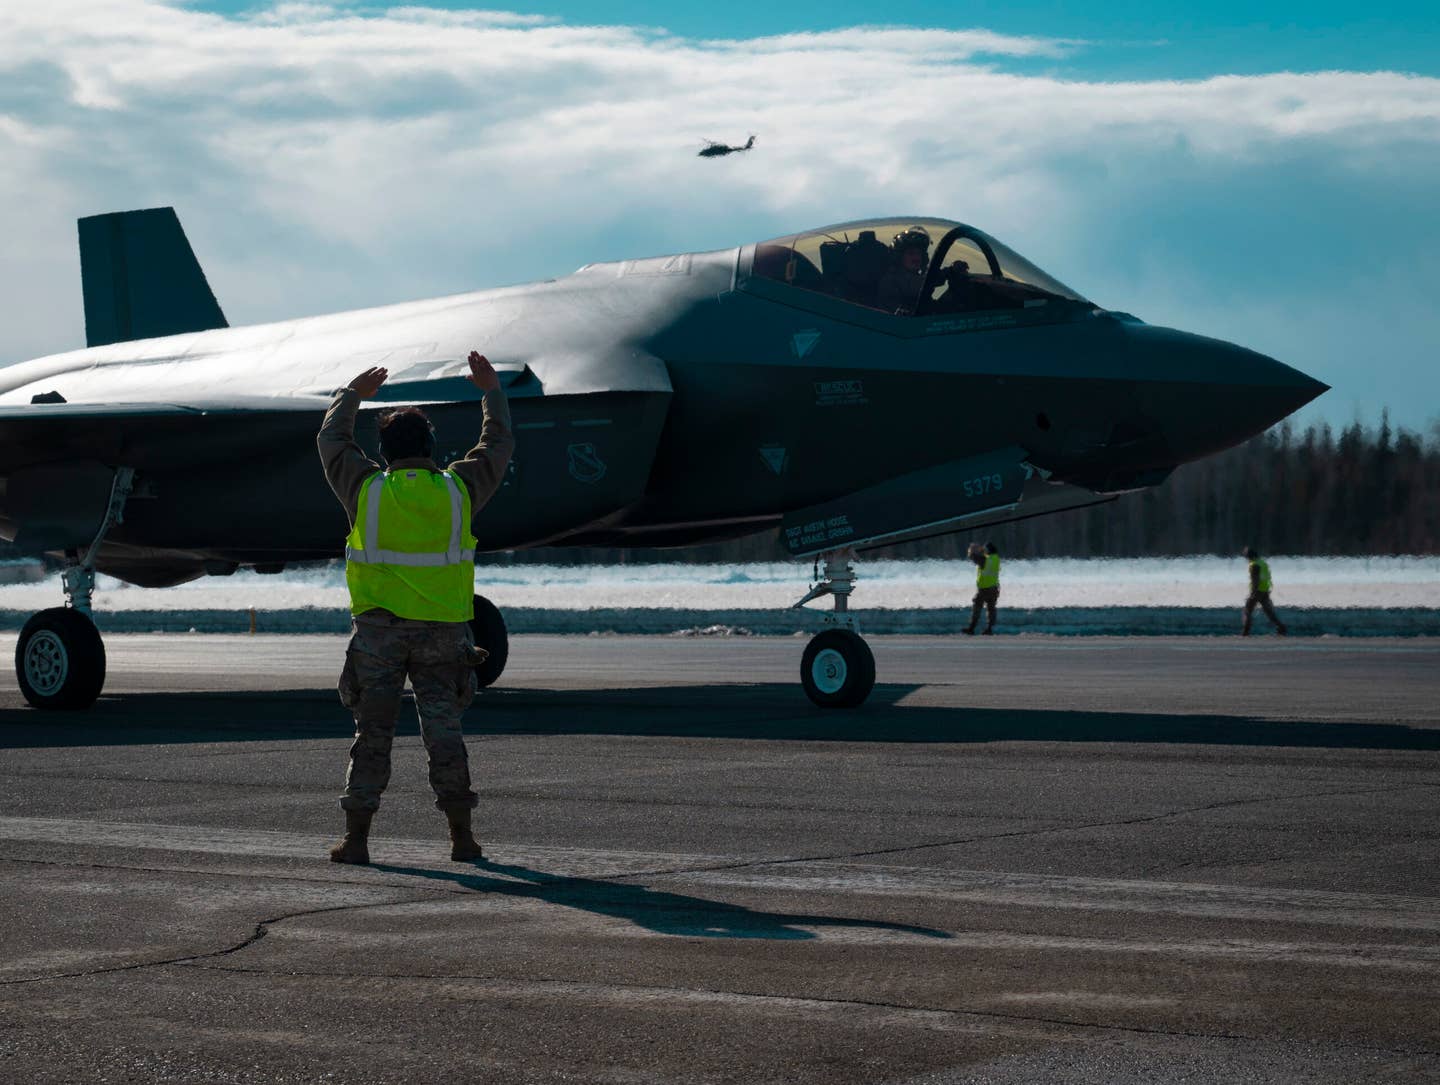 A U.S. Airman marshals a formation of 42 F-35A Lightning IIs during a routine readiness exercise at Eielson Air Force Base, Alaska, March 25, 2022. This capabilities demonstration represented the culmination of the dedicated efforts of the 354th Fighter Wing, with each Airman providing vital contributions to ensure Team Eielson’s readiness to deliver airpower anytime, anywhere. (U.S. Air Force photo by Airman 1st Class Elizabeth Schoubroek)